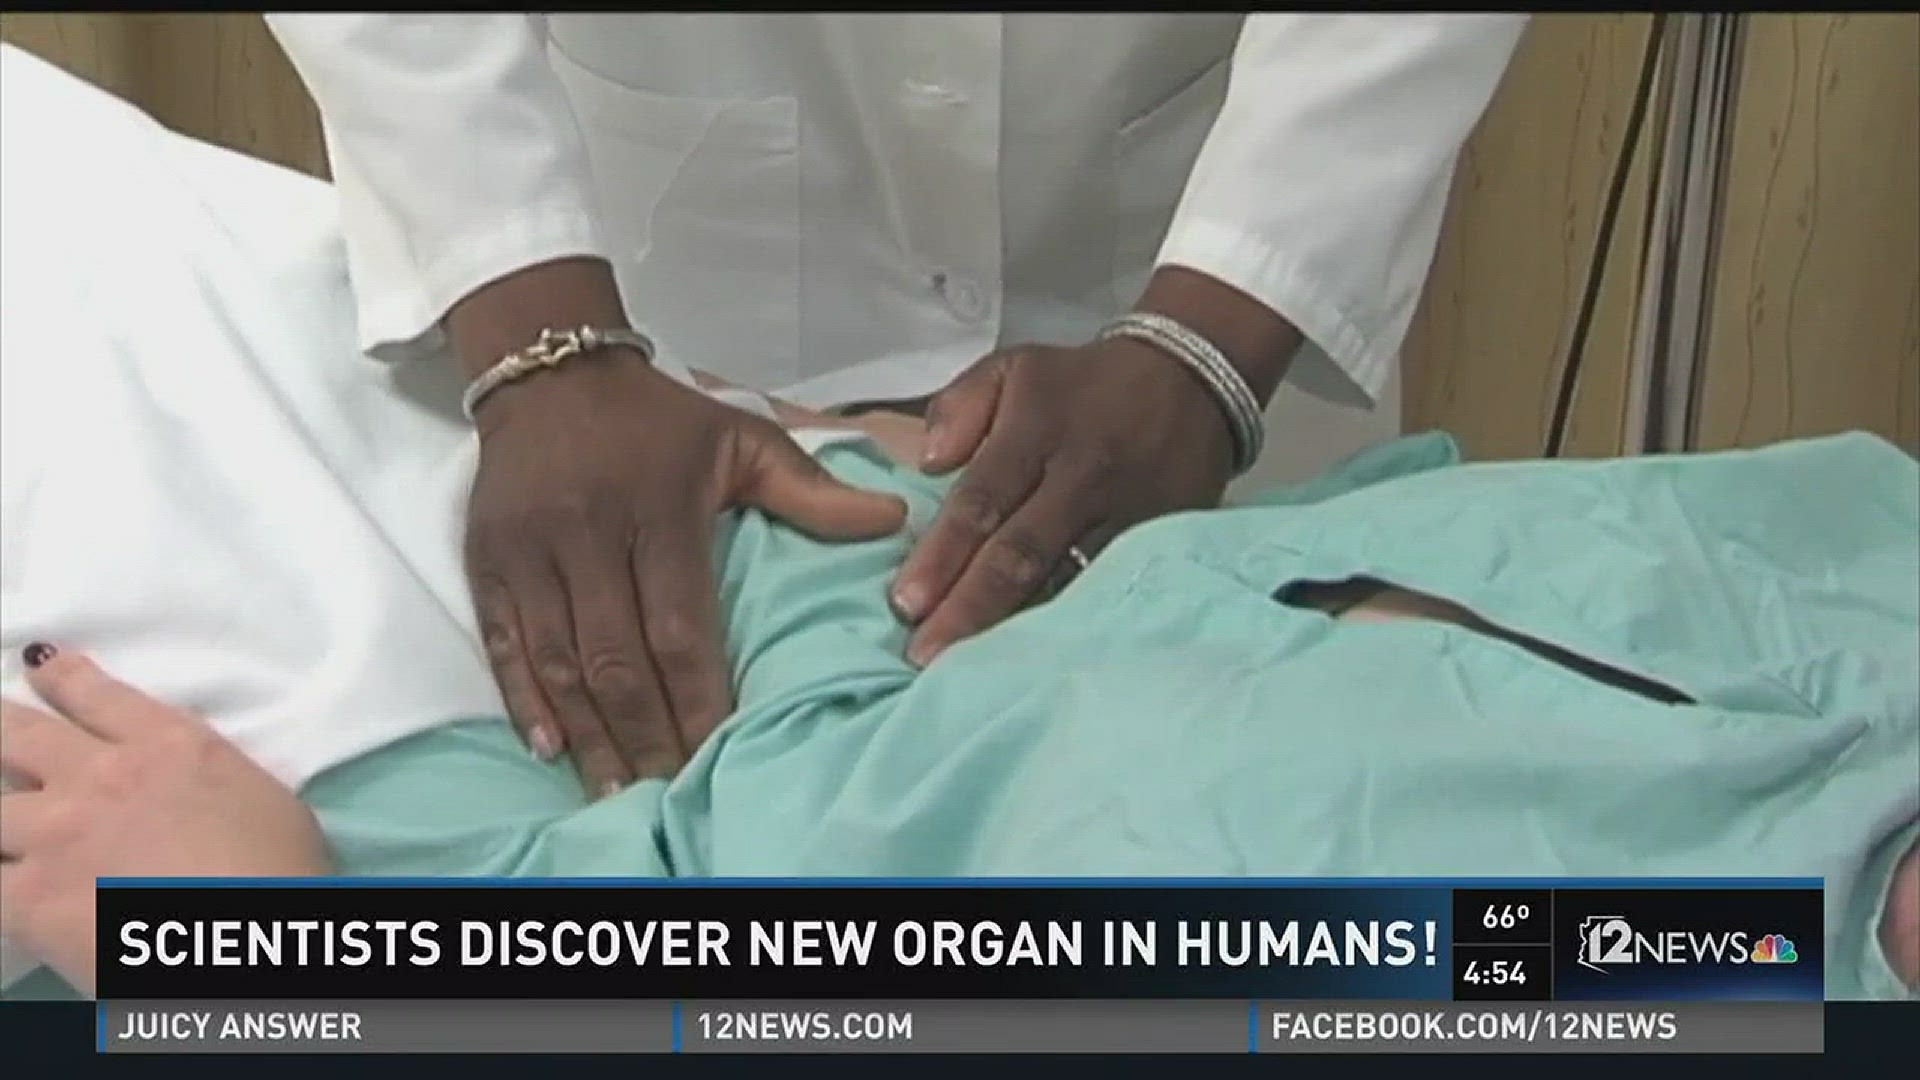 Scientists discover new organ in humans called the mesentery.